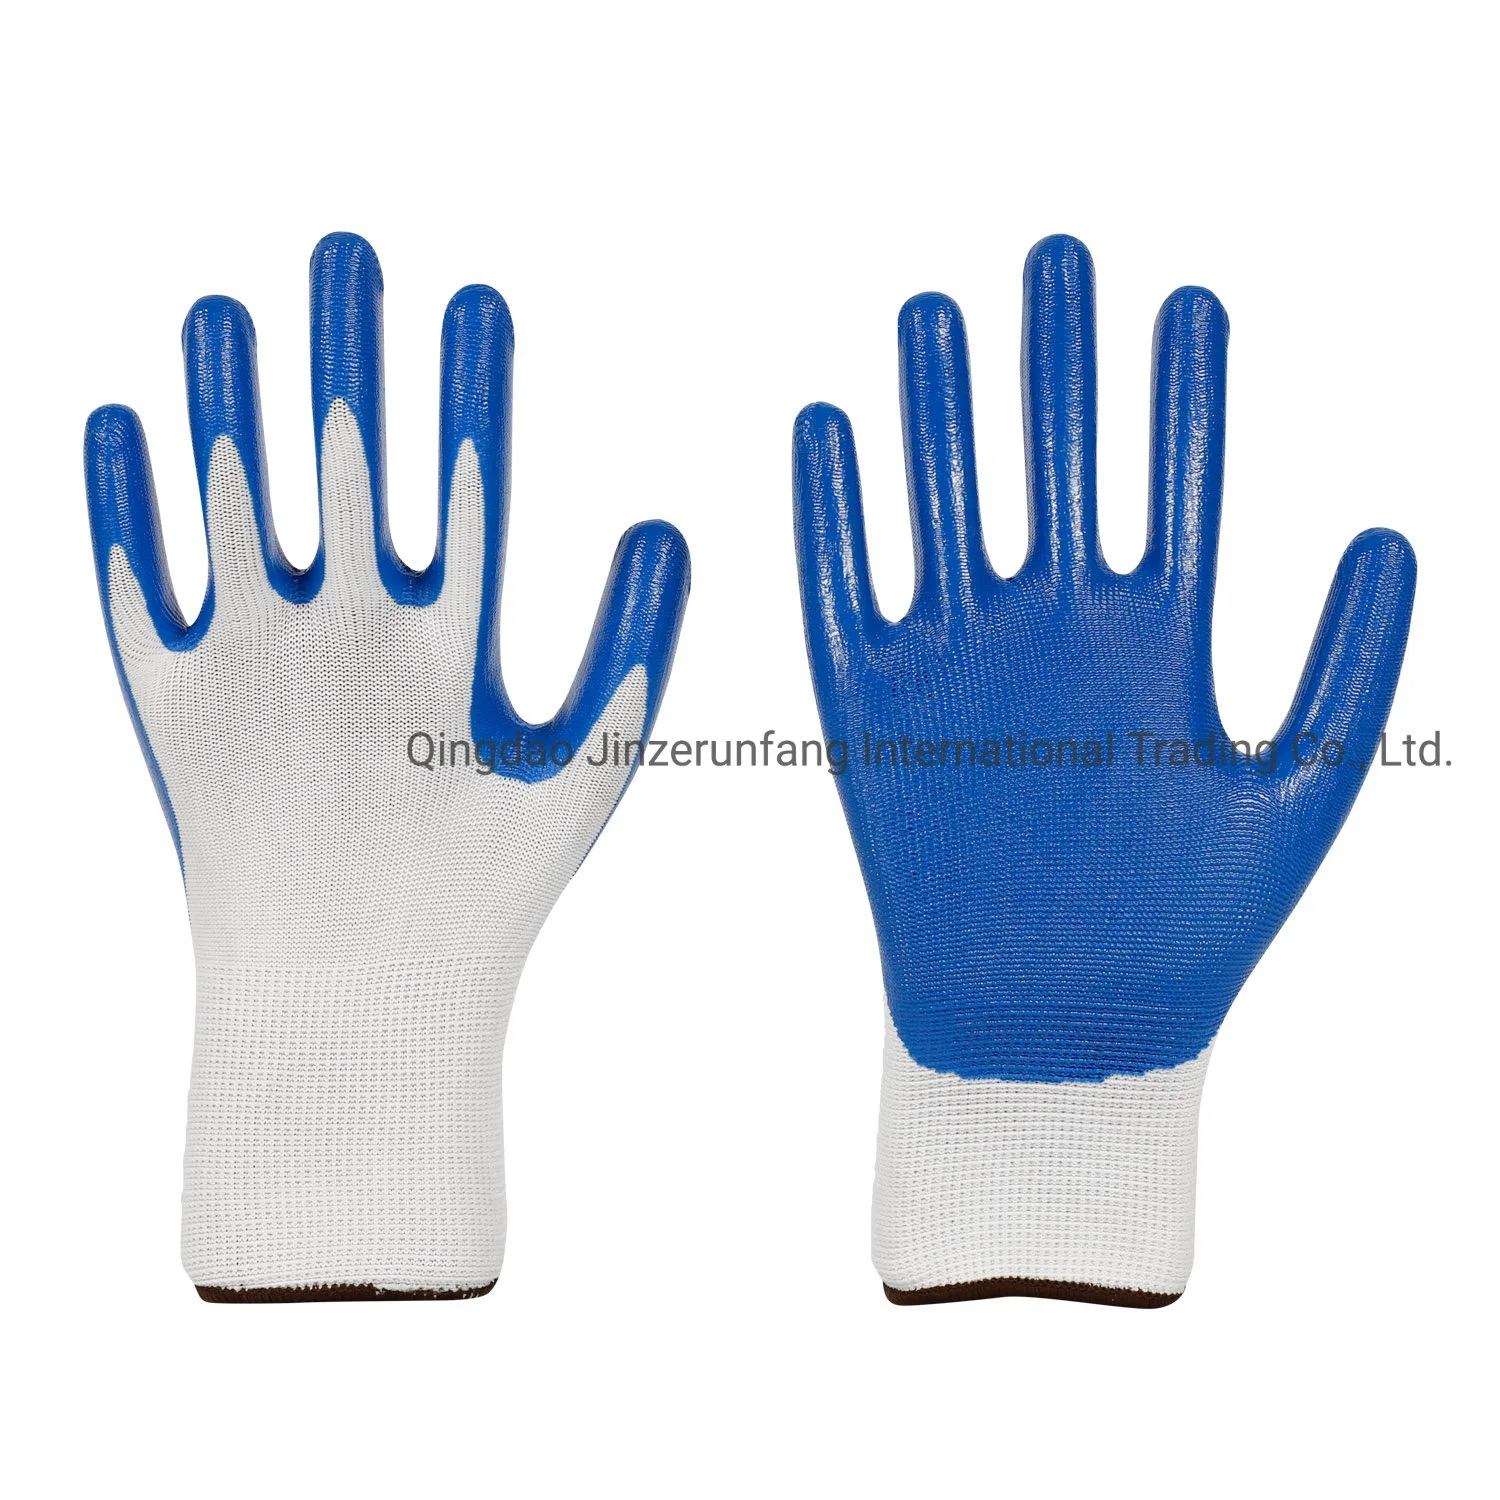 Blue Nitrile Coated Industrial Hand 13G Labor Protective Safety Work Gloves for Construction Garden Working Gloves